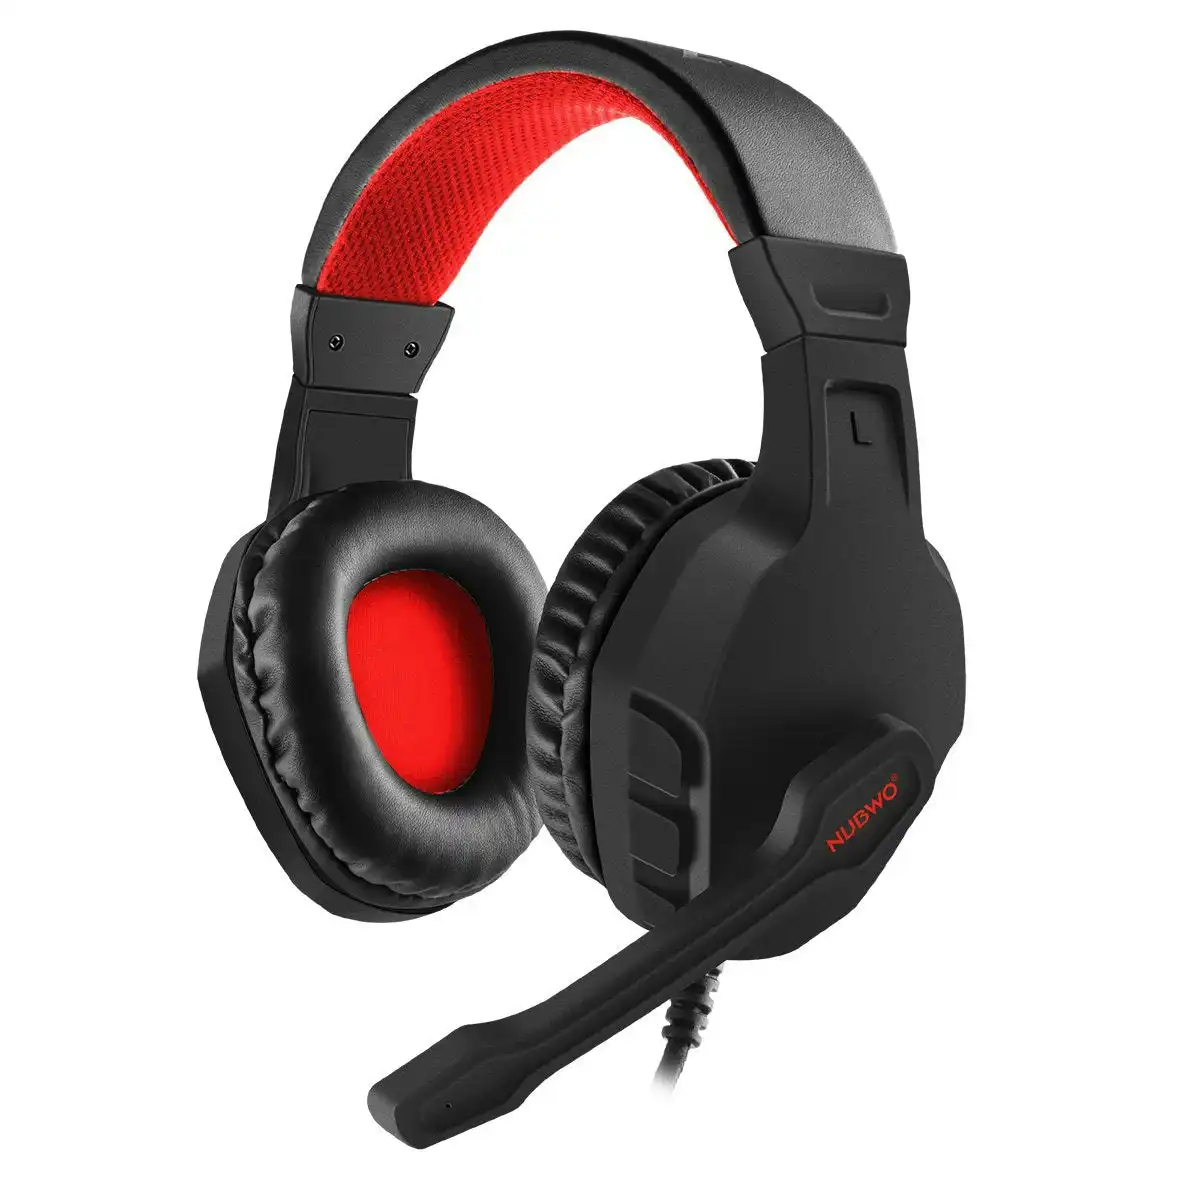 NUBWO U3 3.5mm Gaming Headset for PC, PS4, Laptop, Xbox One, Mac, iPad, Nintendo Switch Games, Computer Game Gamer Over Ear